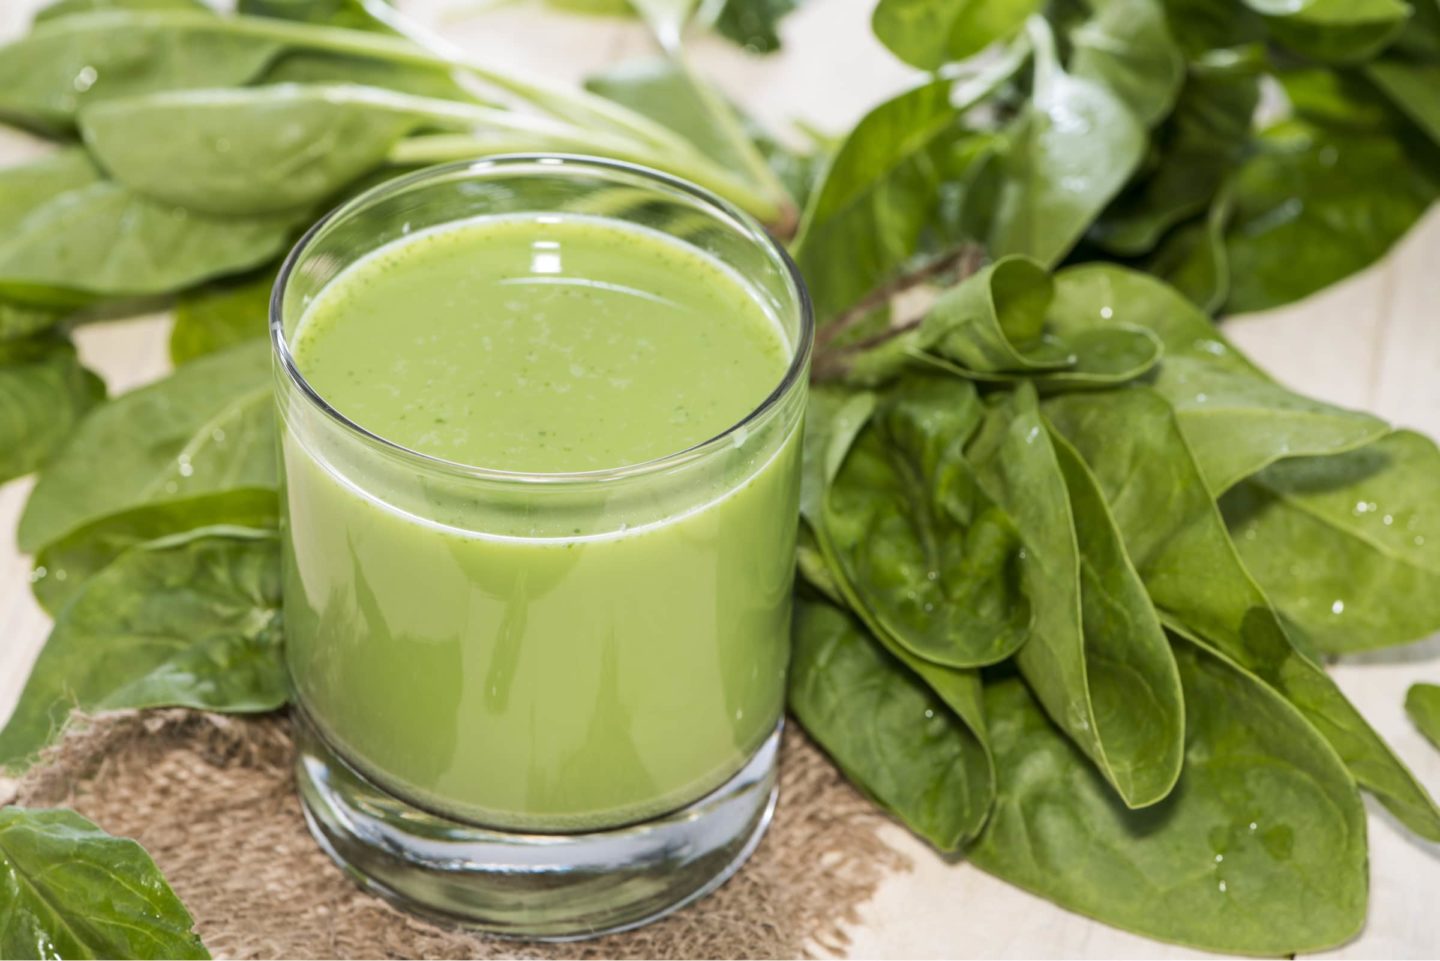 Homemade Spinach Juice